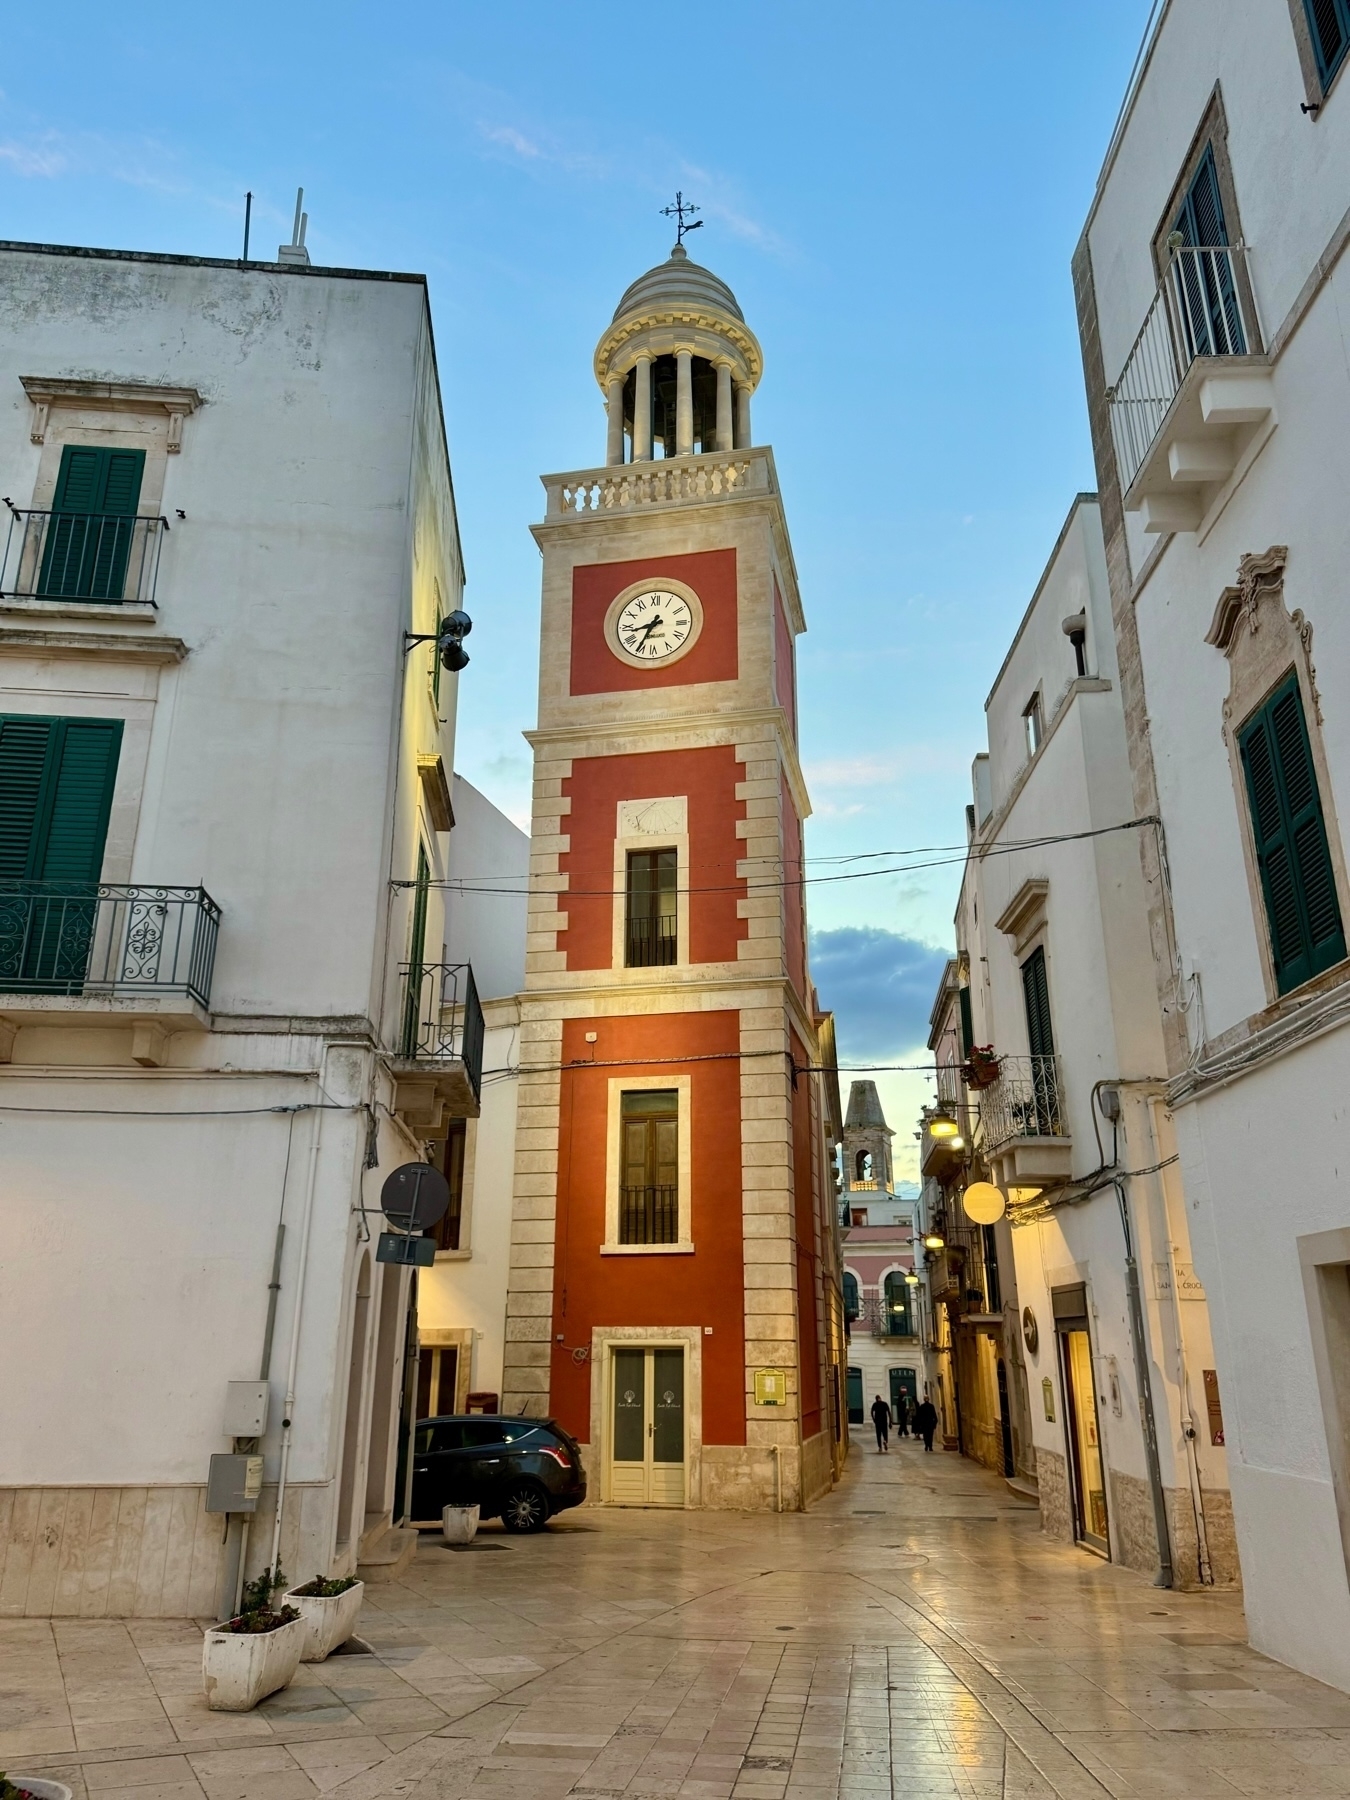 This image features a street view of a picturesque European town during dusk. The focal point is a tall, red clock tower with a white clock face and a dome roof. The tower is flanked by whitewashed buildings with green shutters and balconies. 